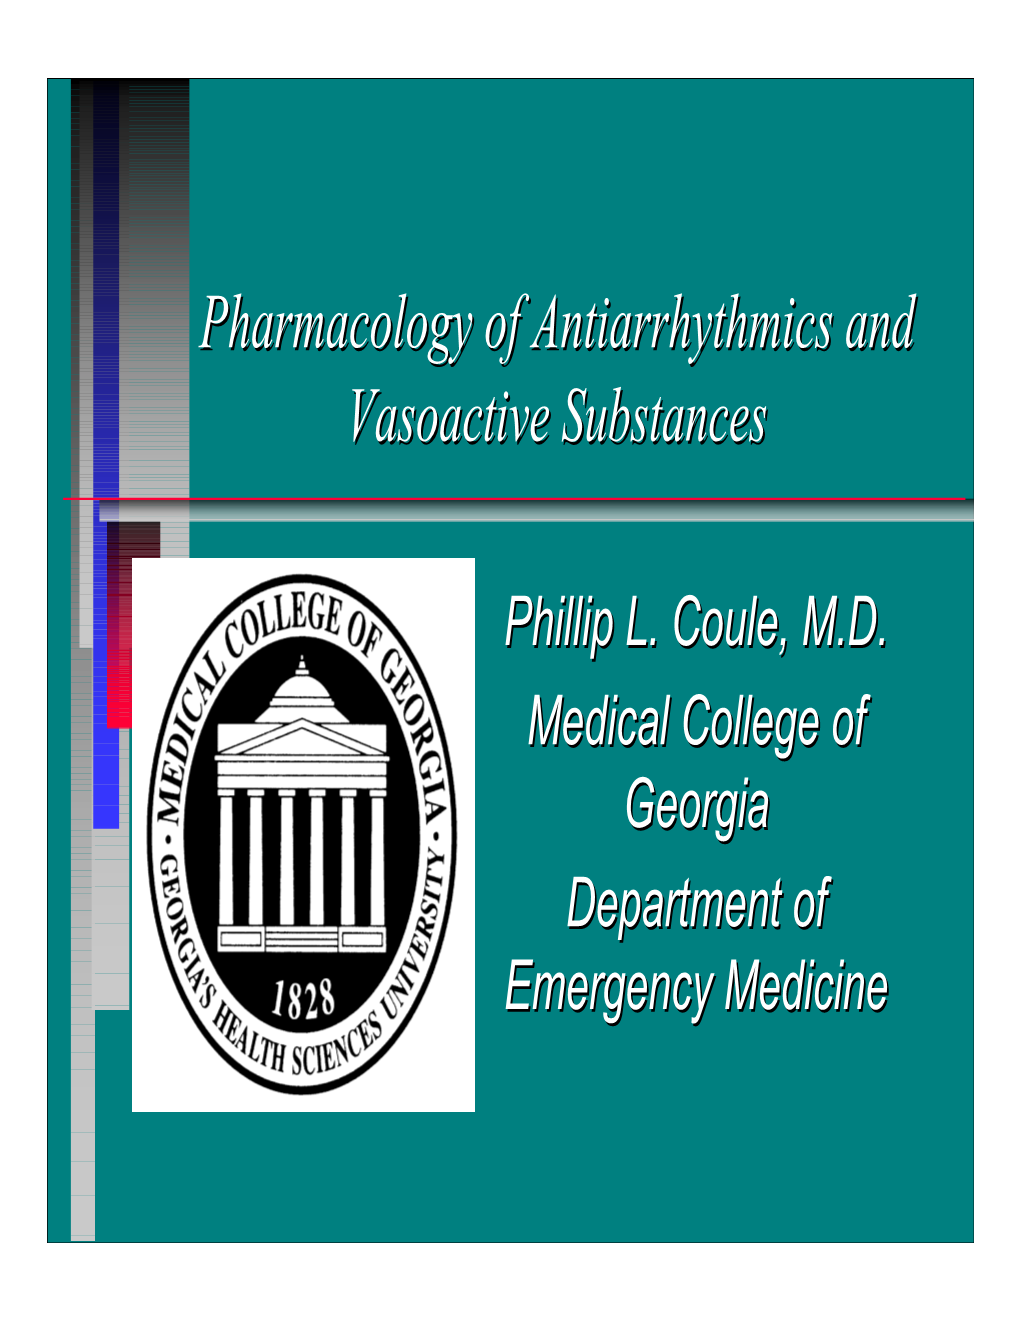 Cardiovascular Pharmacology by Phillip L. Coule, M.D